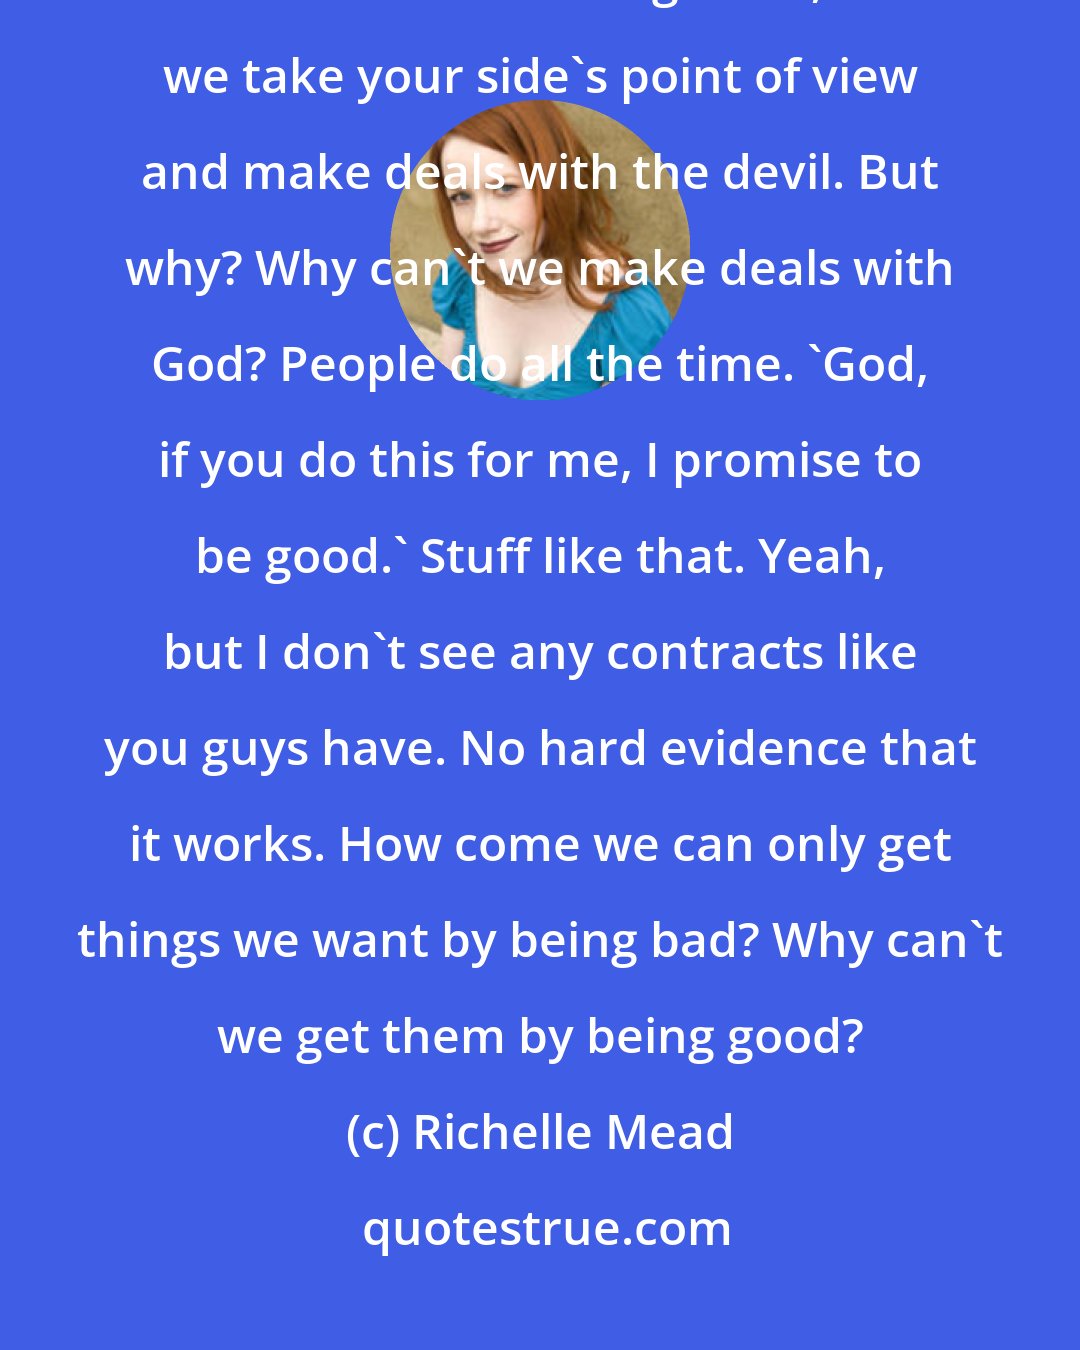 Richelle Mead: We've had to deal with so many complications. We're still dealing with them. And what can we do? Nothing - well, unless we take your side's point of view and make deals with the devil. But why? Why can't we make deals with God? People do all the time. 'God, if you do this for me, I promise to be good.' Stuff like that. Yeah, but I don't see any contracts like you guys have. No hard evidence that it works. How come we can only get things we want by being bad? Why can't we get them by being good?